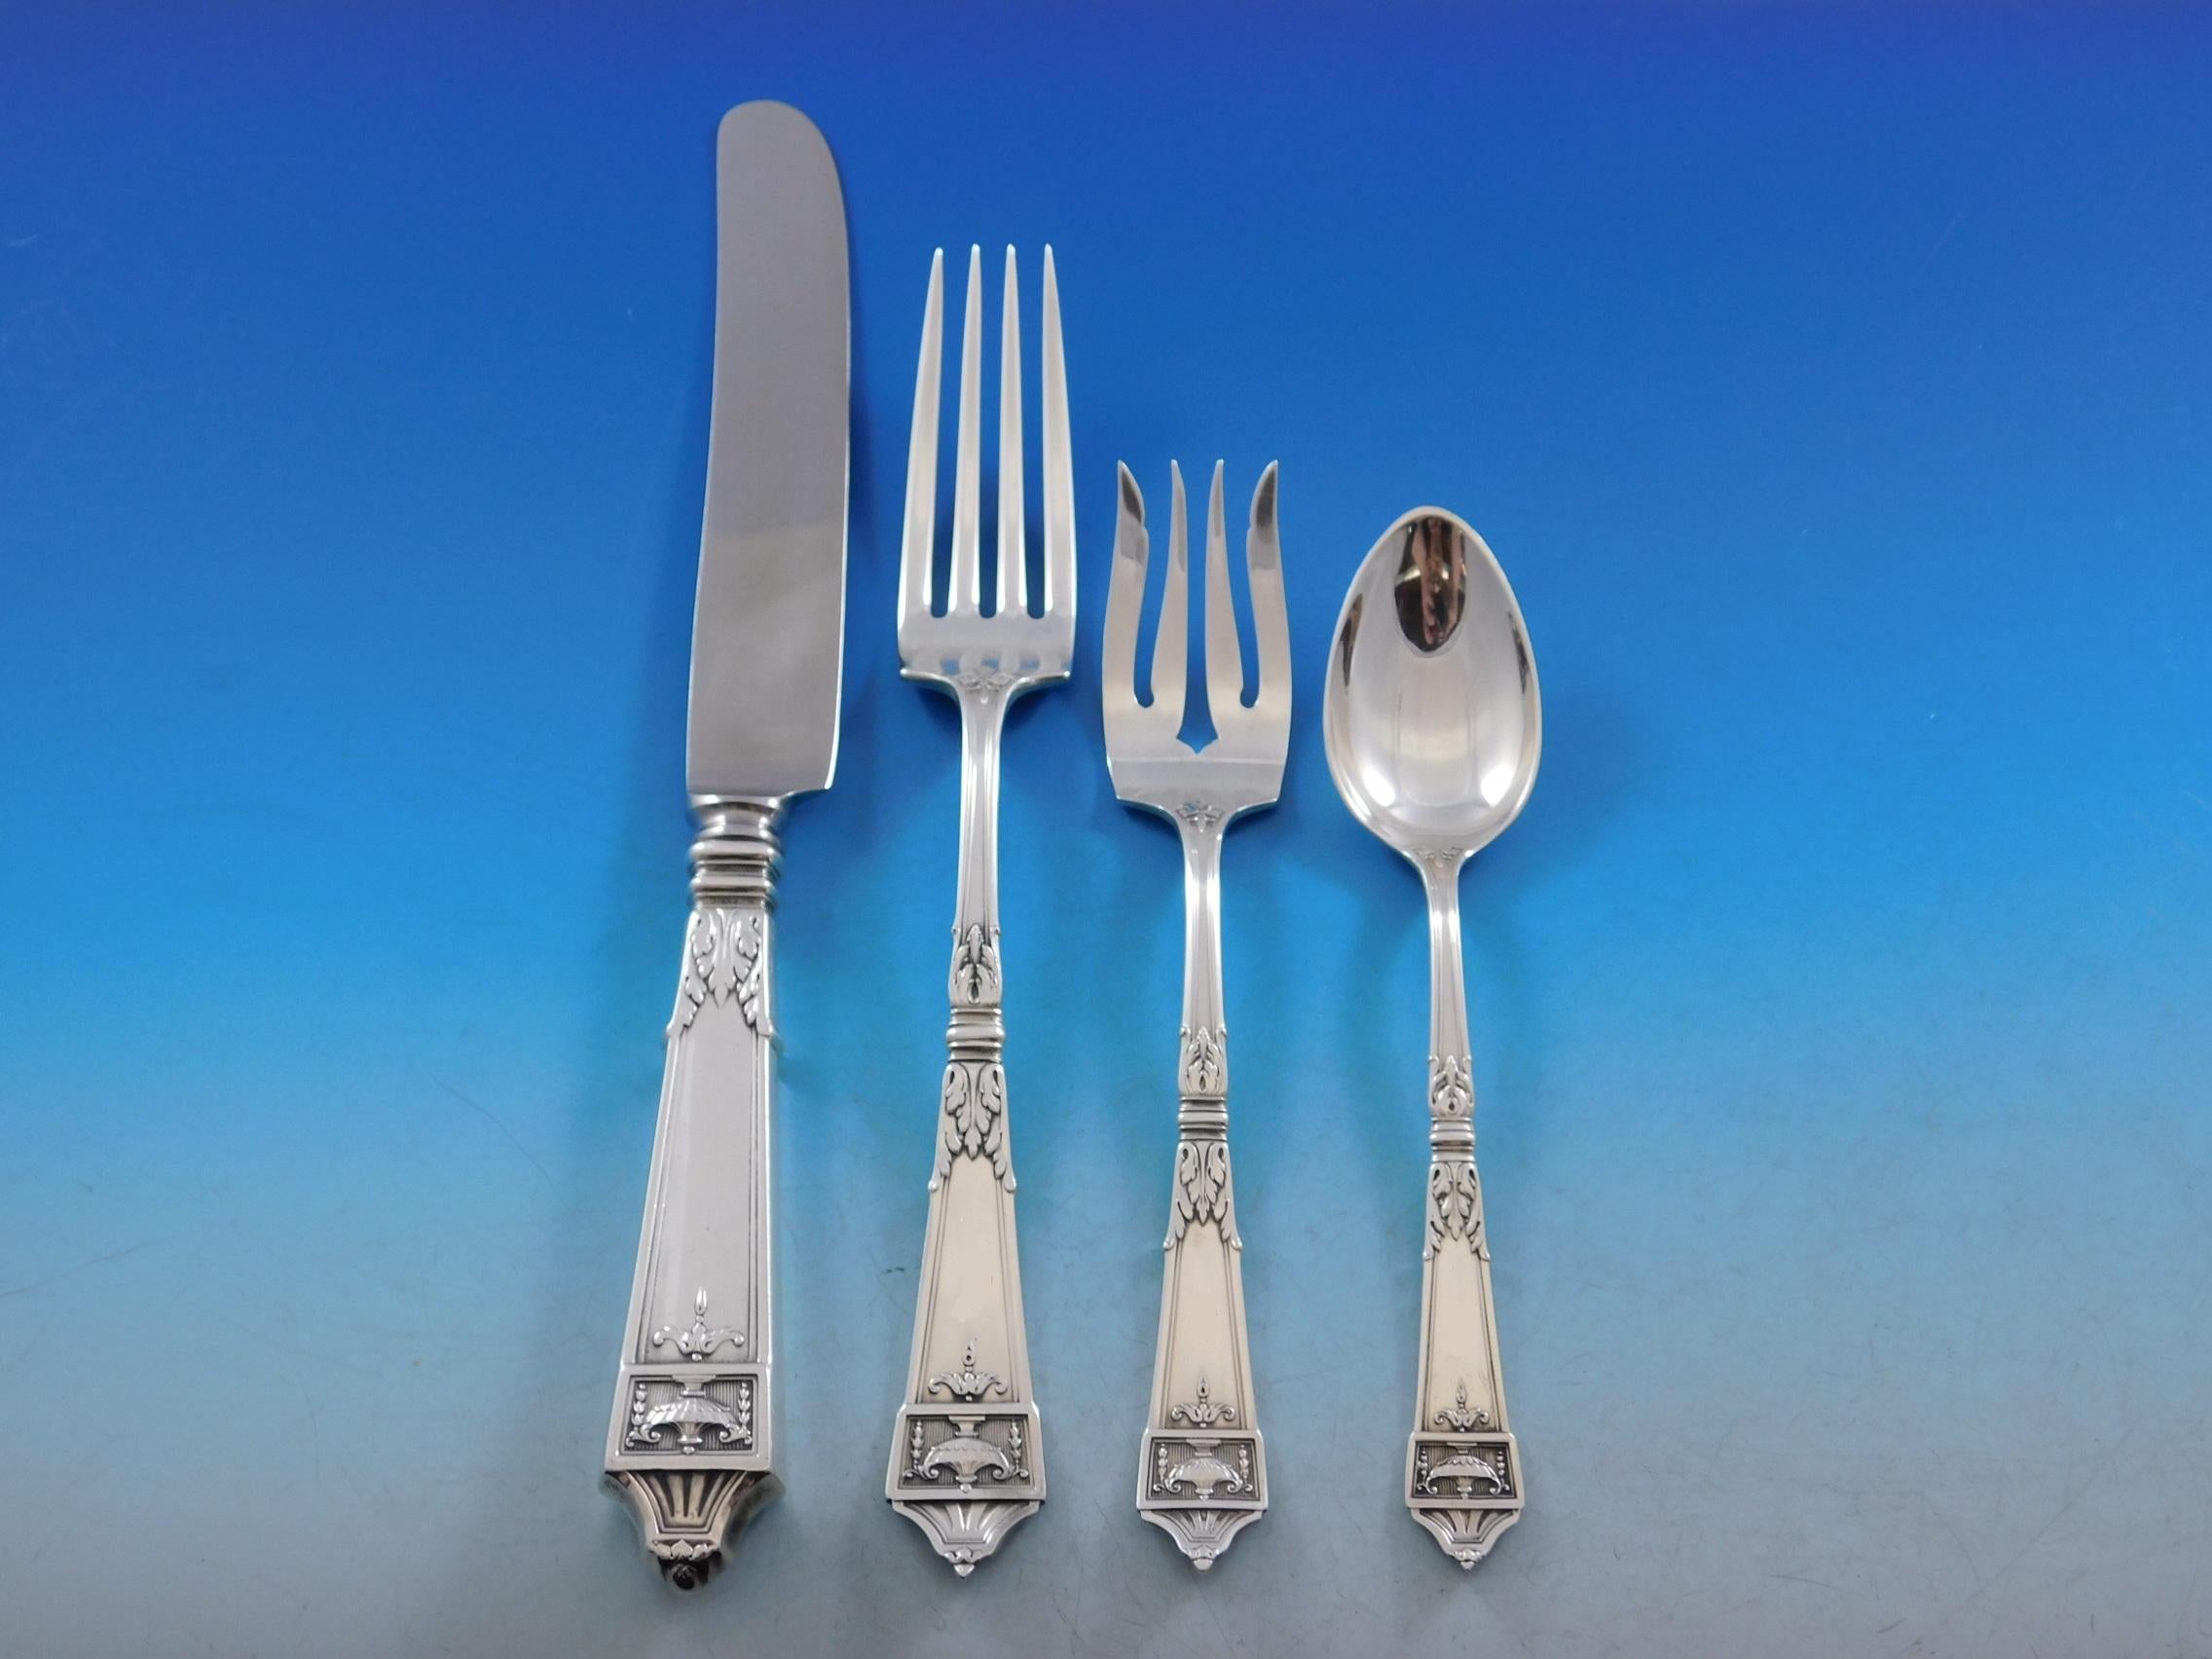 Lansdowne by Gorham Sterling Silver Flatware Set for 12 Service 72 Pieces Dinner In Excellent Condition For Sale In Big Bend, WI